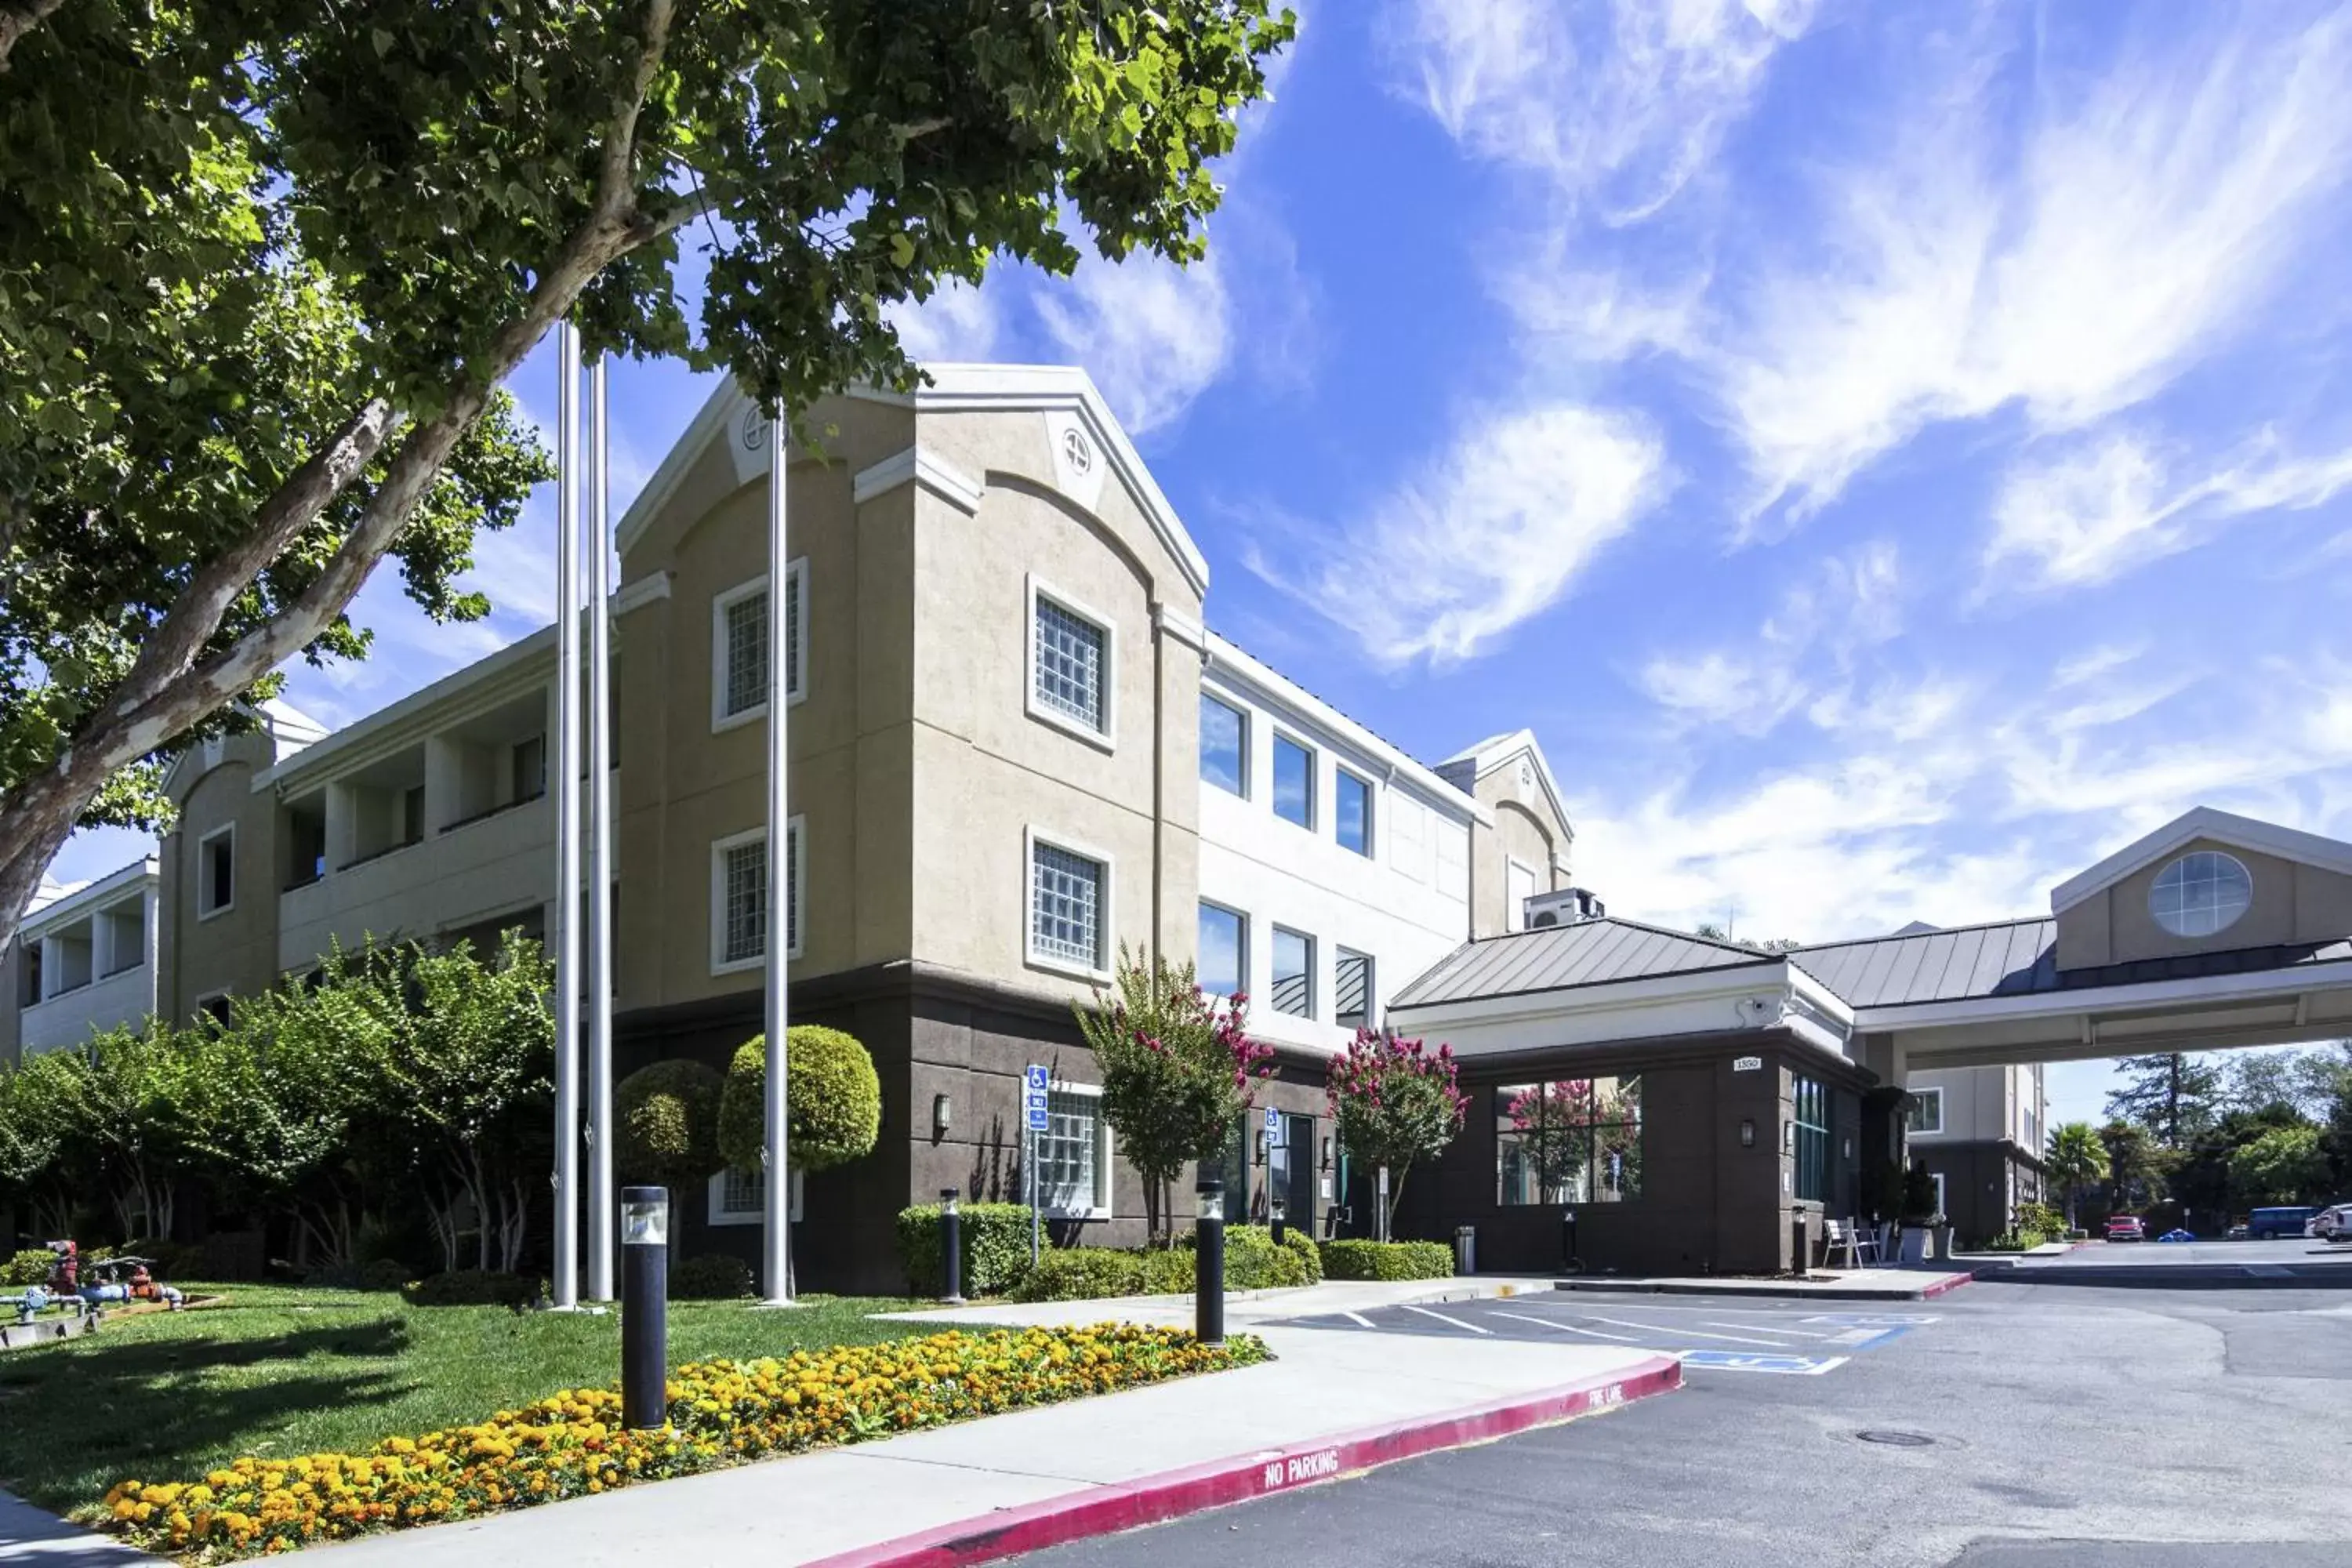 Property Building in Country Inn & Suites by Radisson, San Jose International Airport, CA